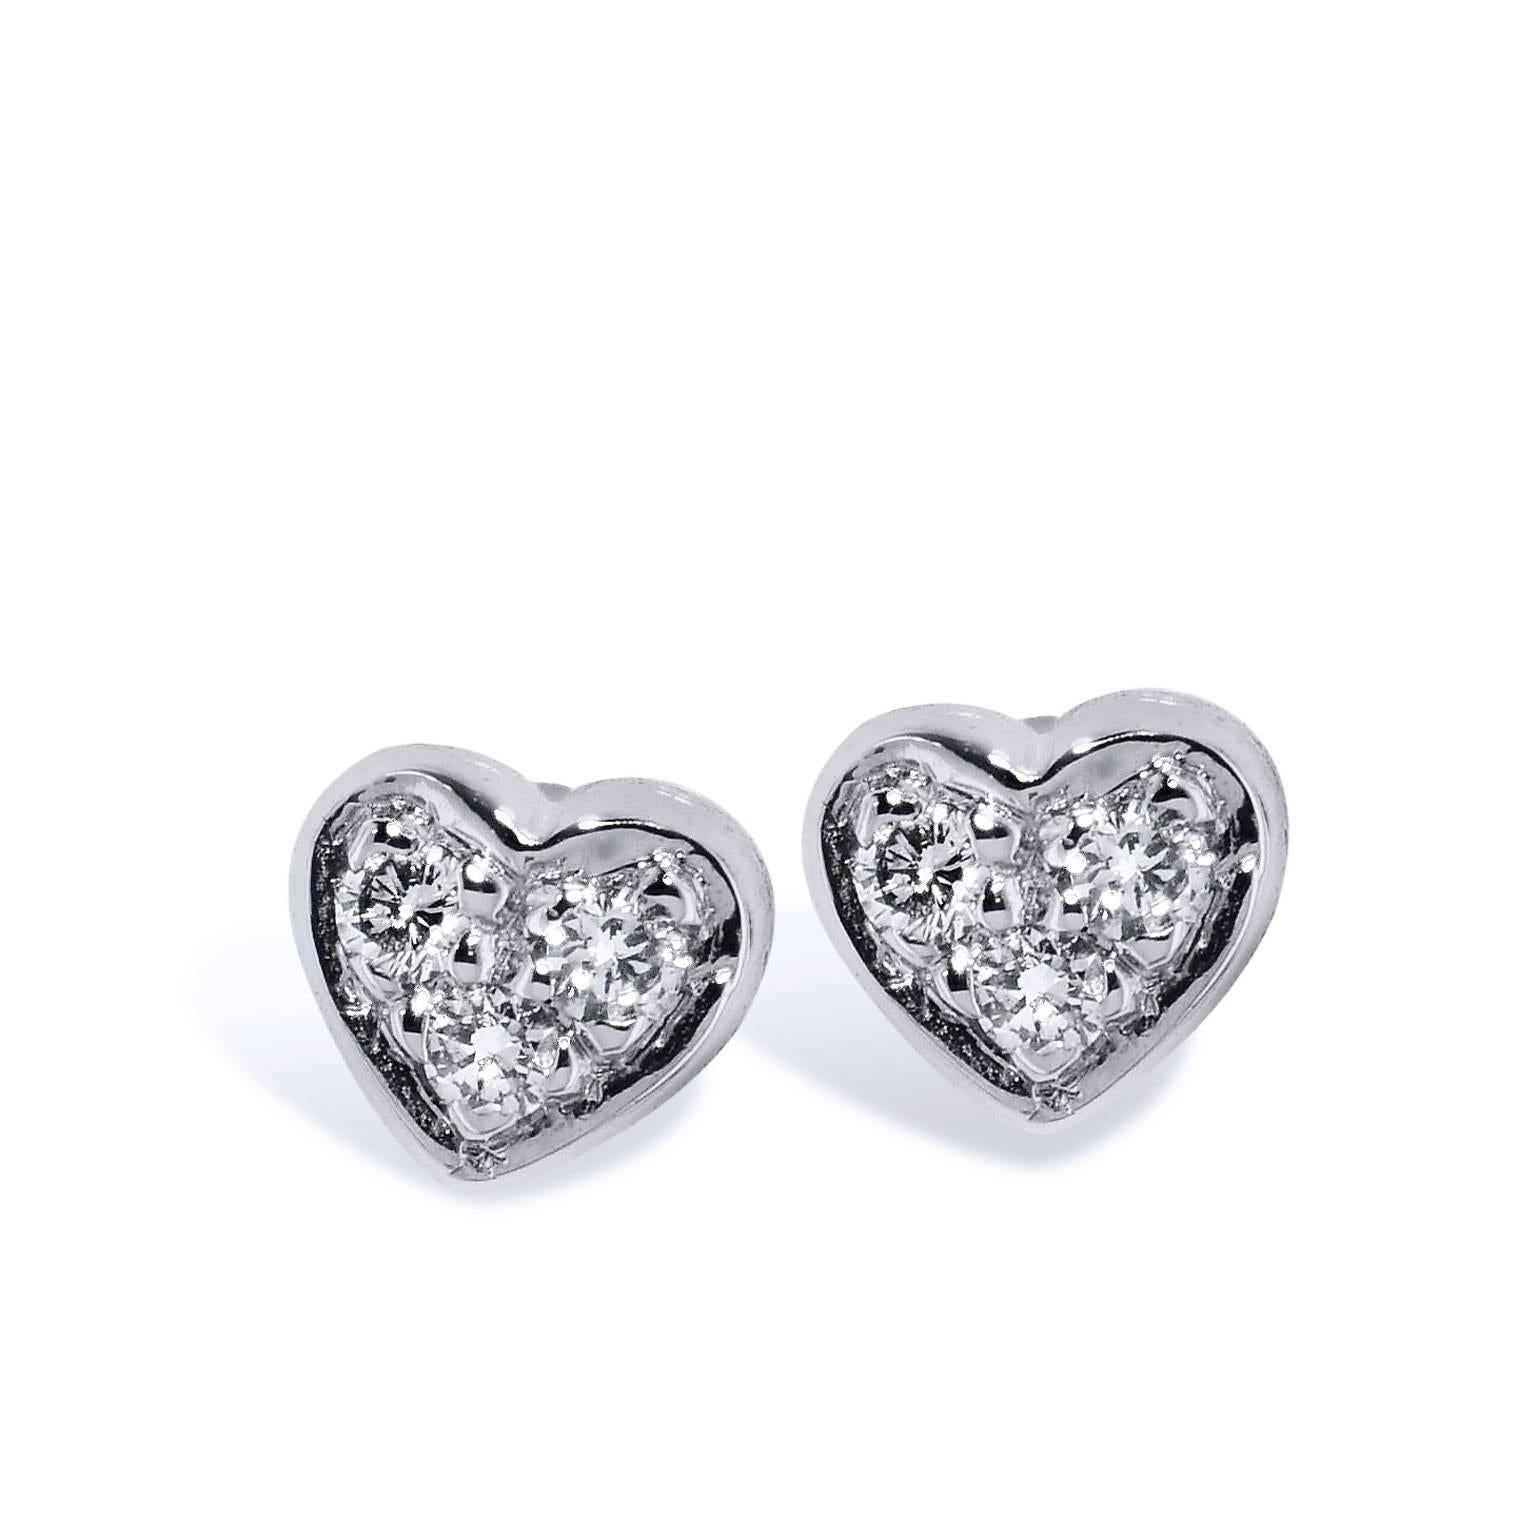 Simple and sweet, 0.05 carat of pave set diamond (G/H/VS2/SI1) are fashioned in the shape of a heart in these handmade 14 karat white gold stud
earrings. Let a little bit of your love shine through with this pair of earrings.